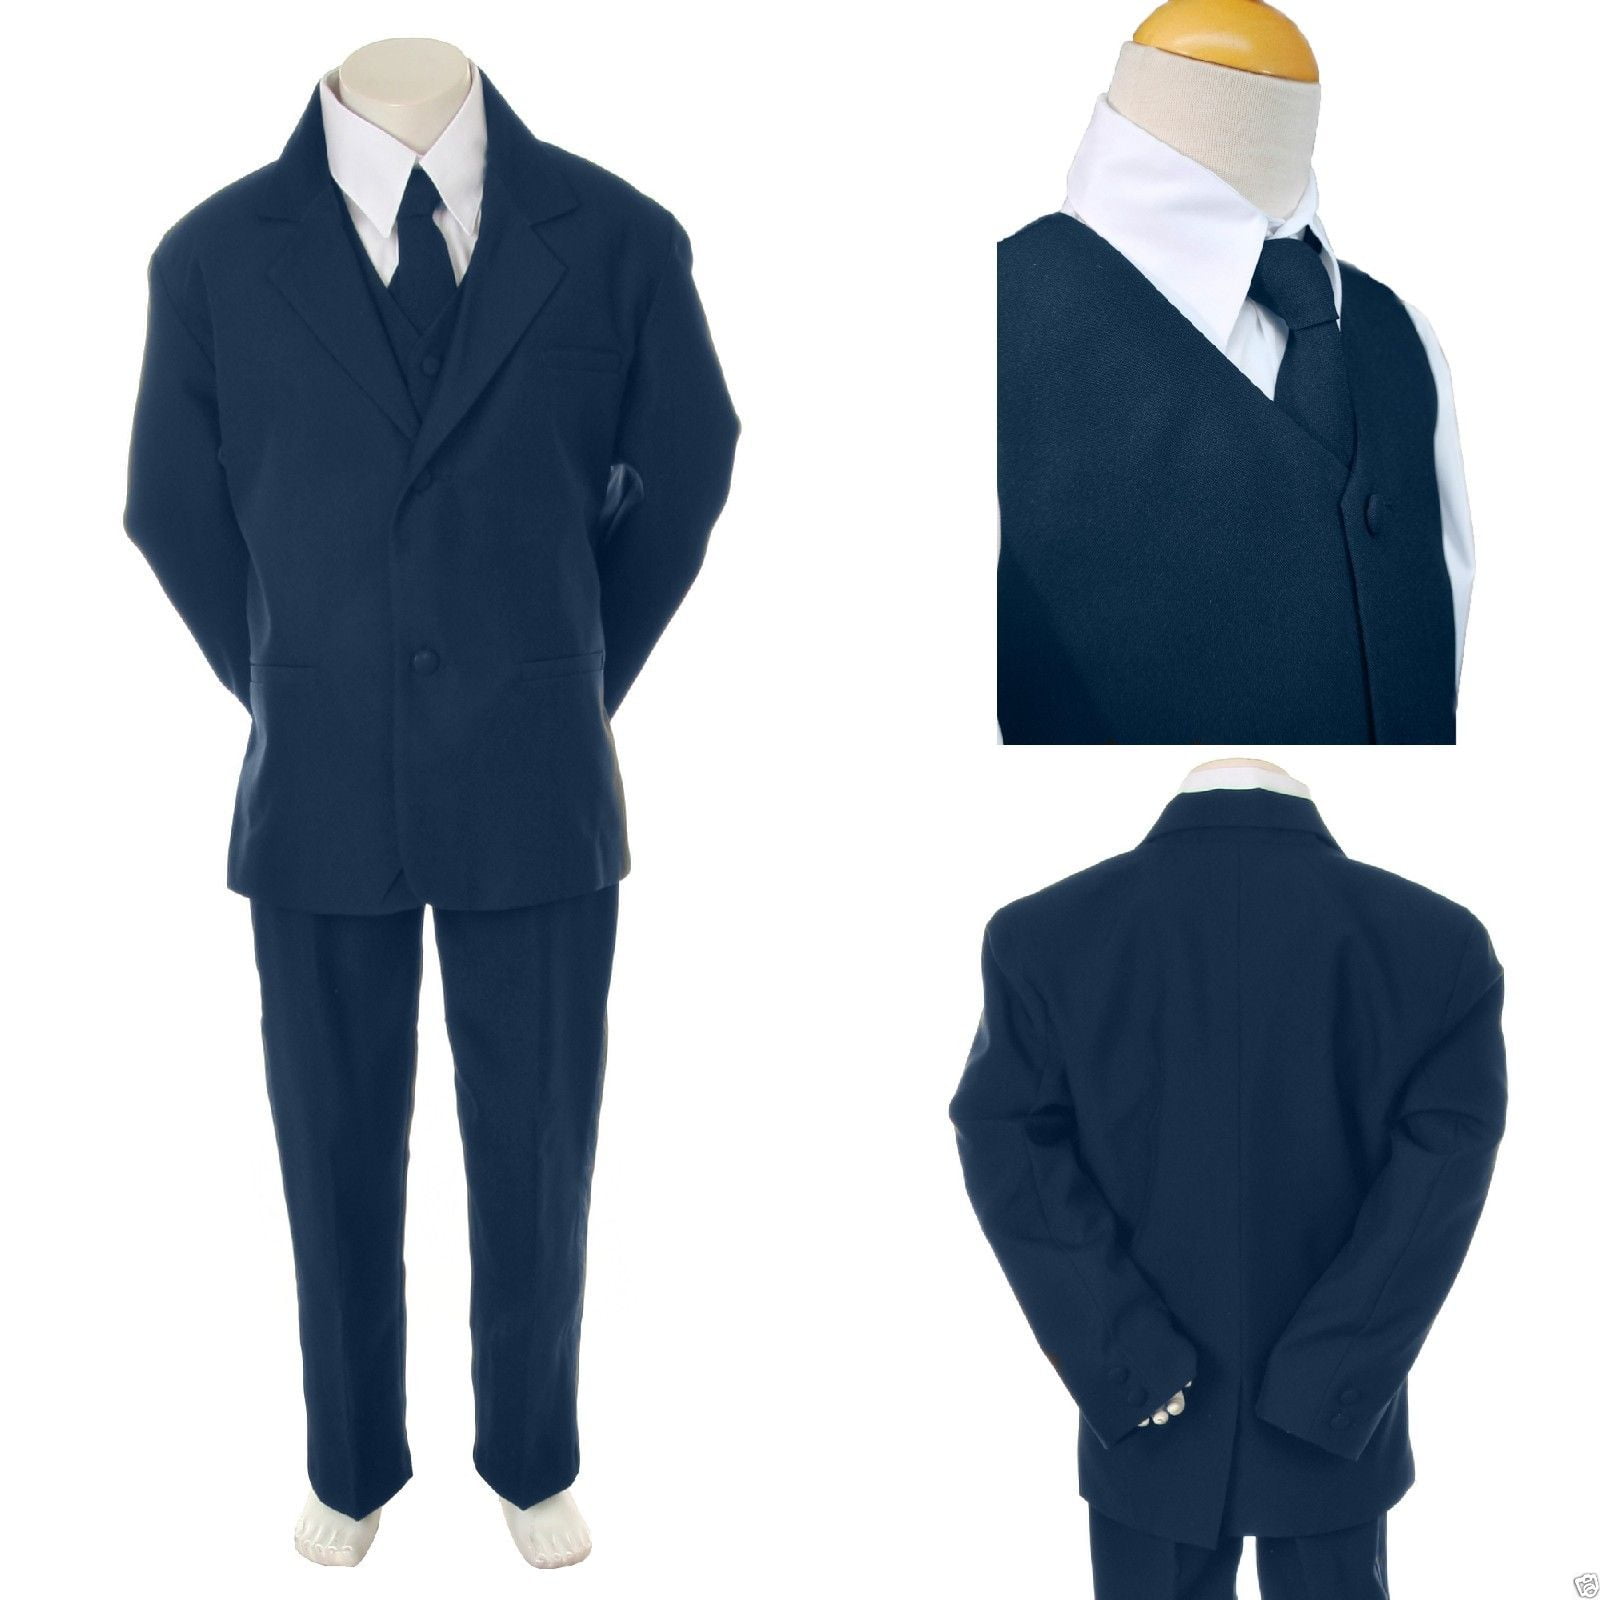 Boys Suits 5 Piece Boys Blue Wedding Suit Page Boy Suit Party Prom 2-15 Years 